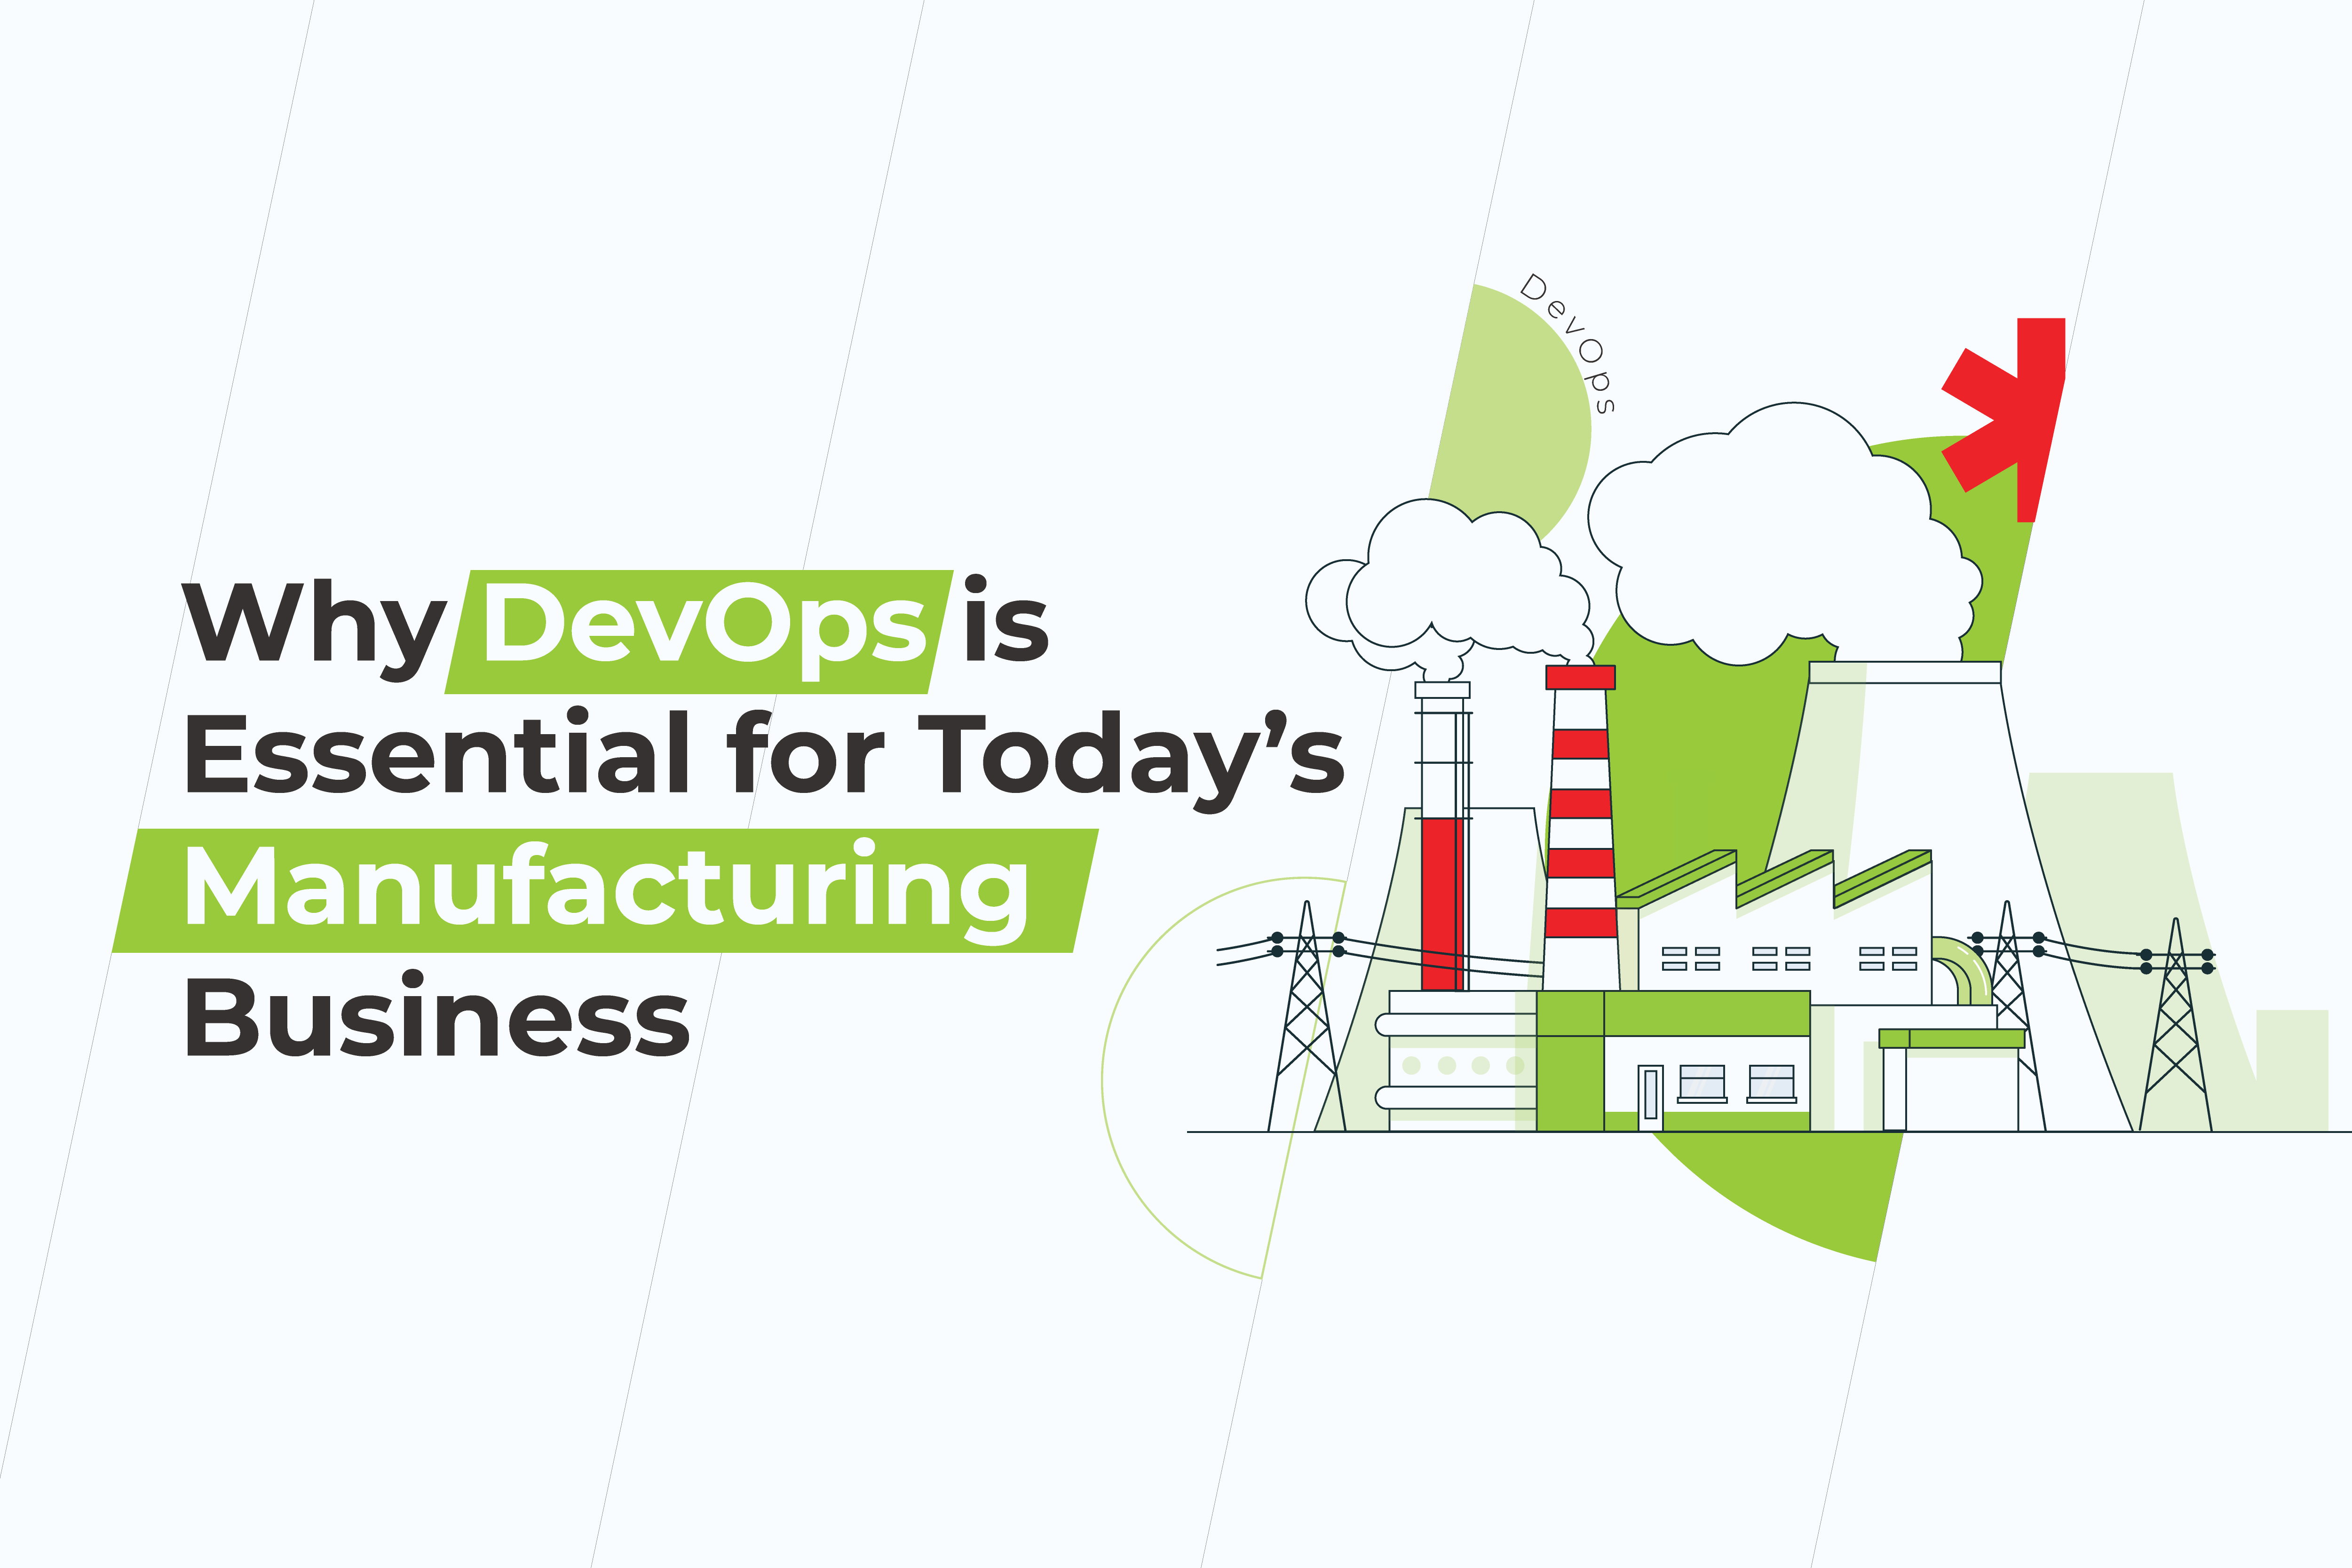 Why DevOps is Essential for Today’s Manufacturing Business